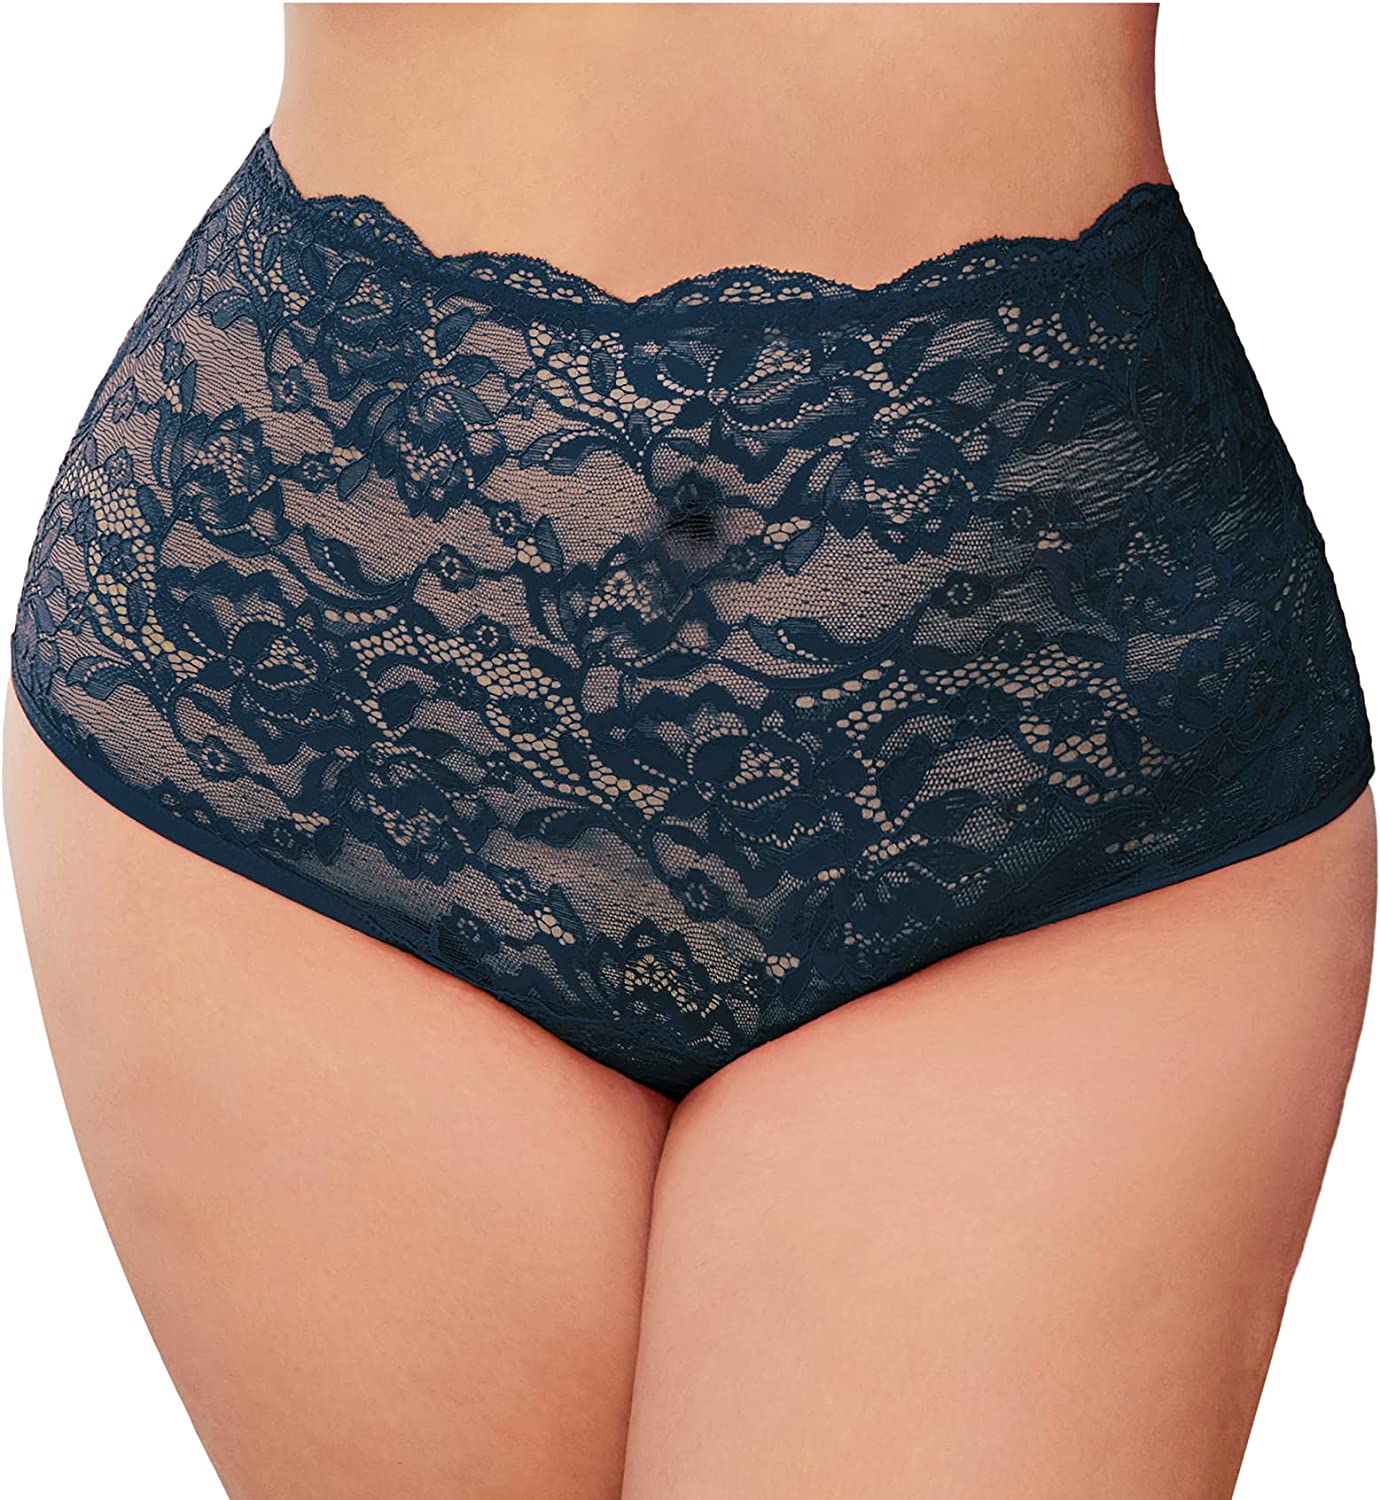 Avidlove Underwear Invisible Seamless Hipster Lace Underwear Full Coverage Panties